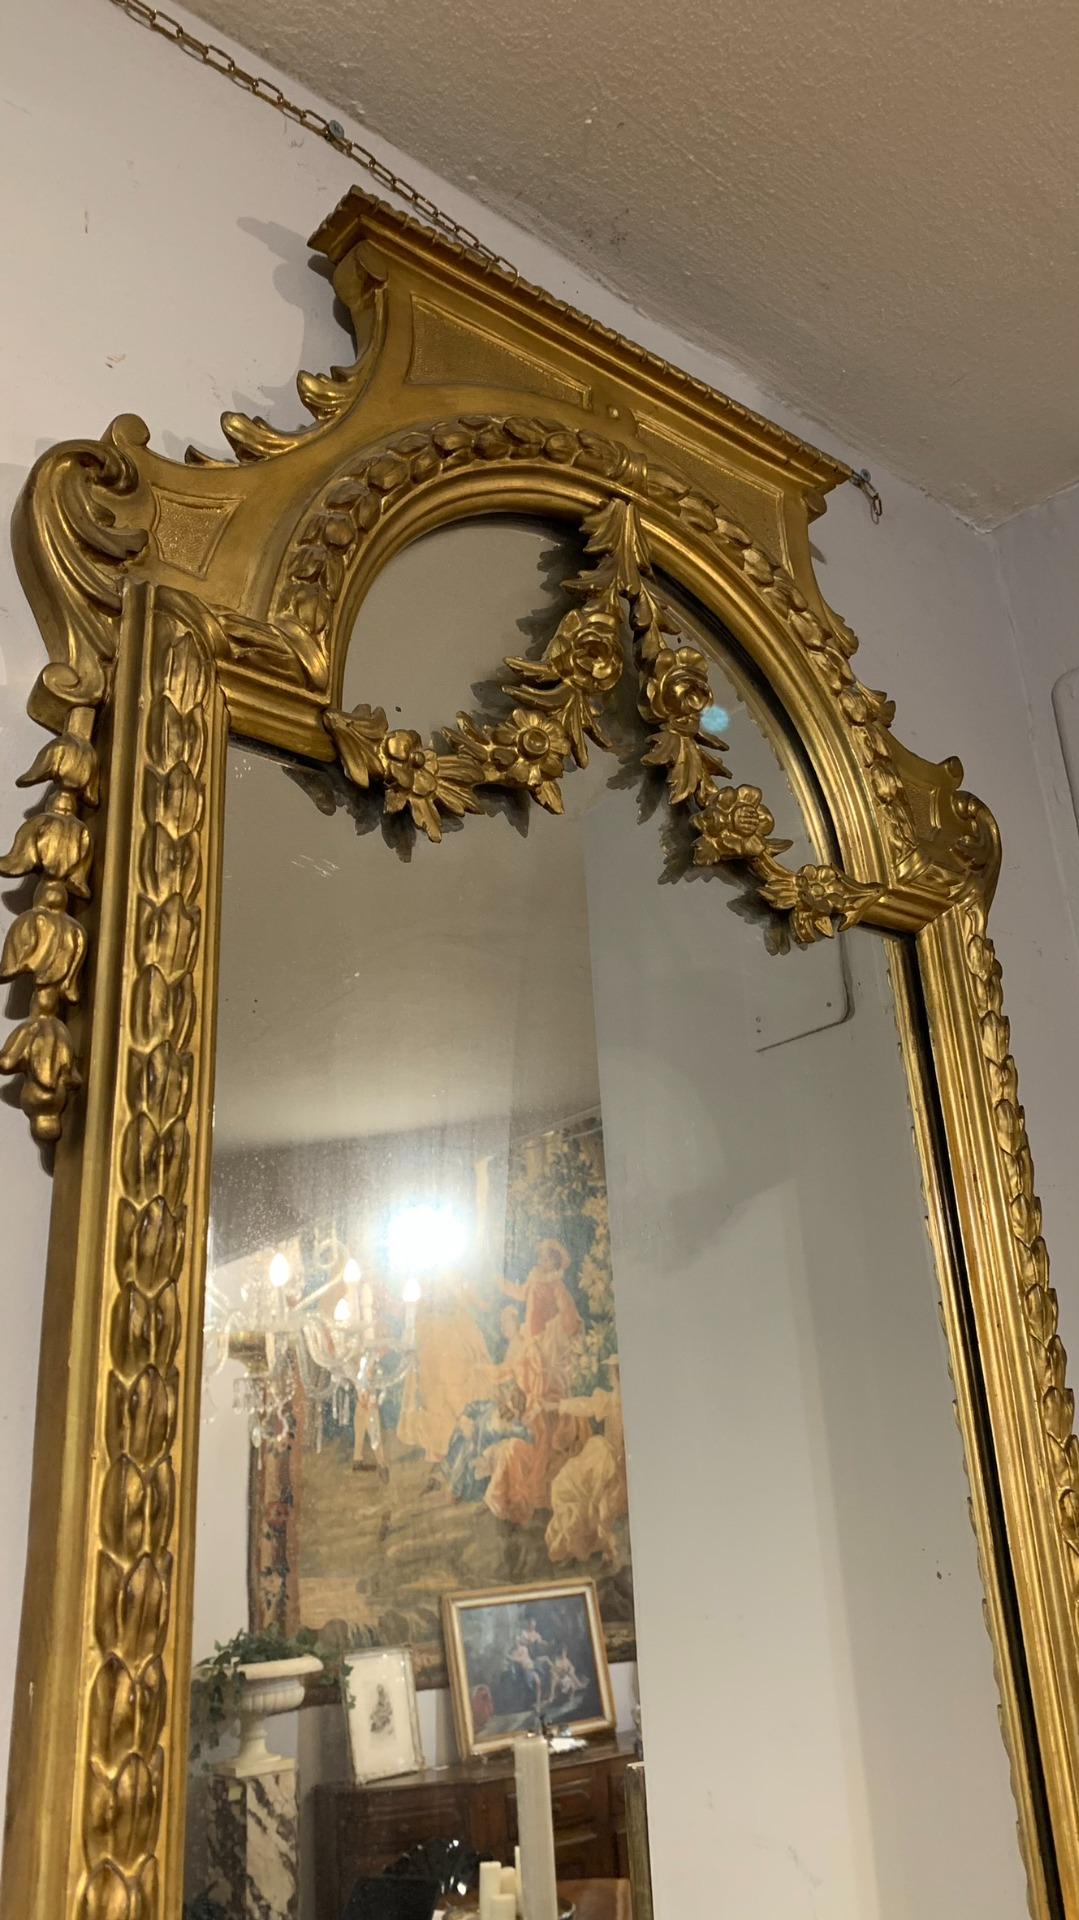 Elegant pair of mirrors in neoclassical style in carved and gilded wood with pure gold leaf. Typical Tuscan manufacture of the 19th century.

MEASURES: cm 145x56.